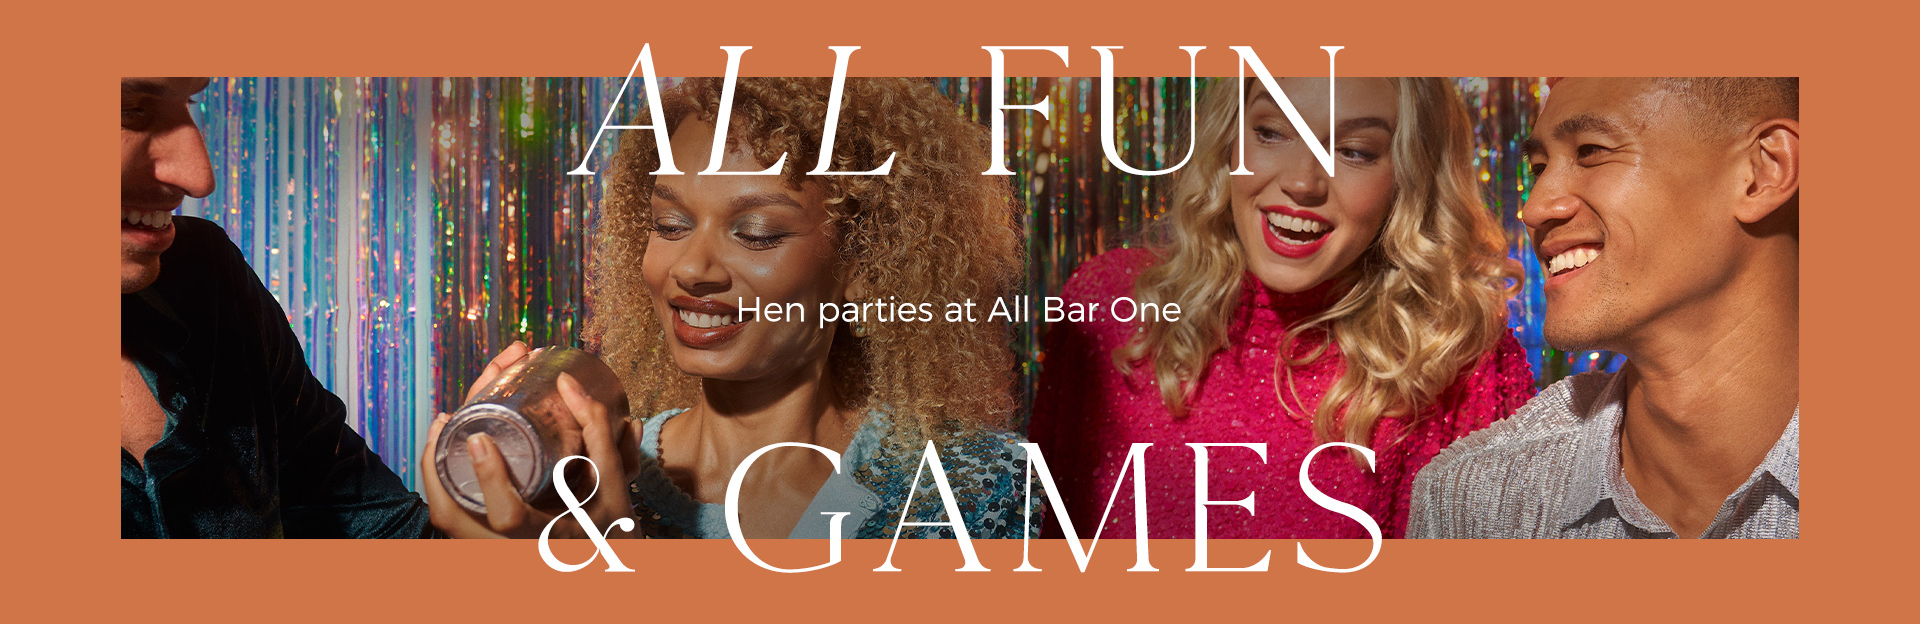 Hen parties at All Bar One Waterloo